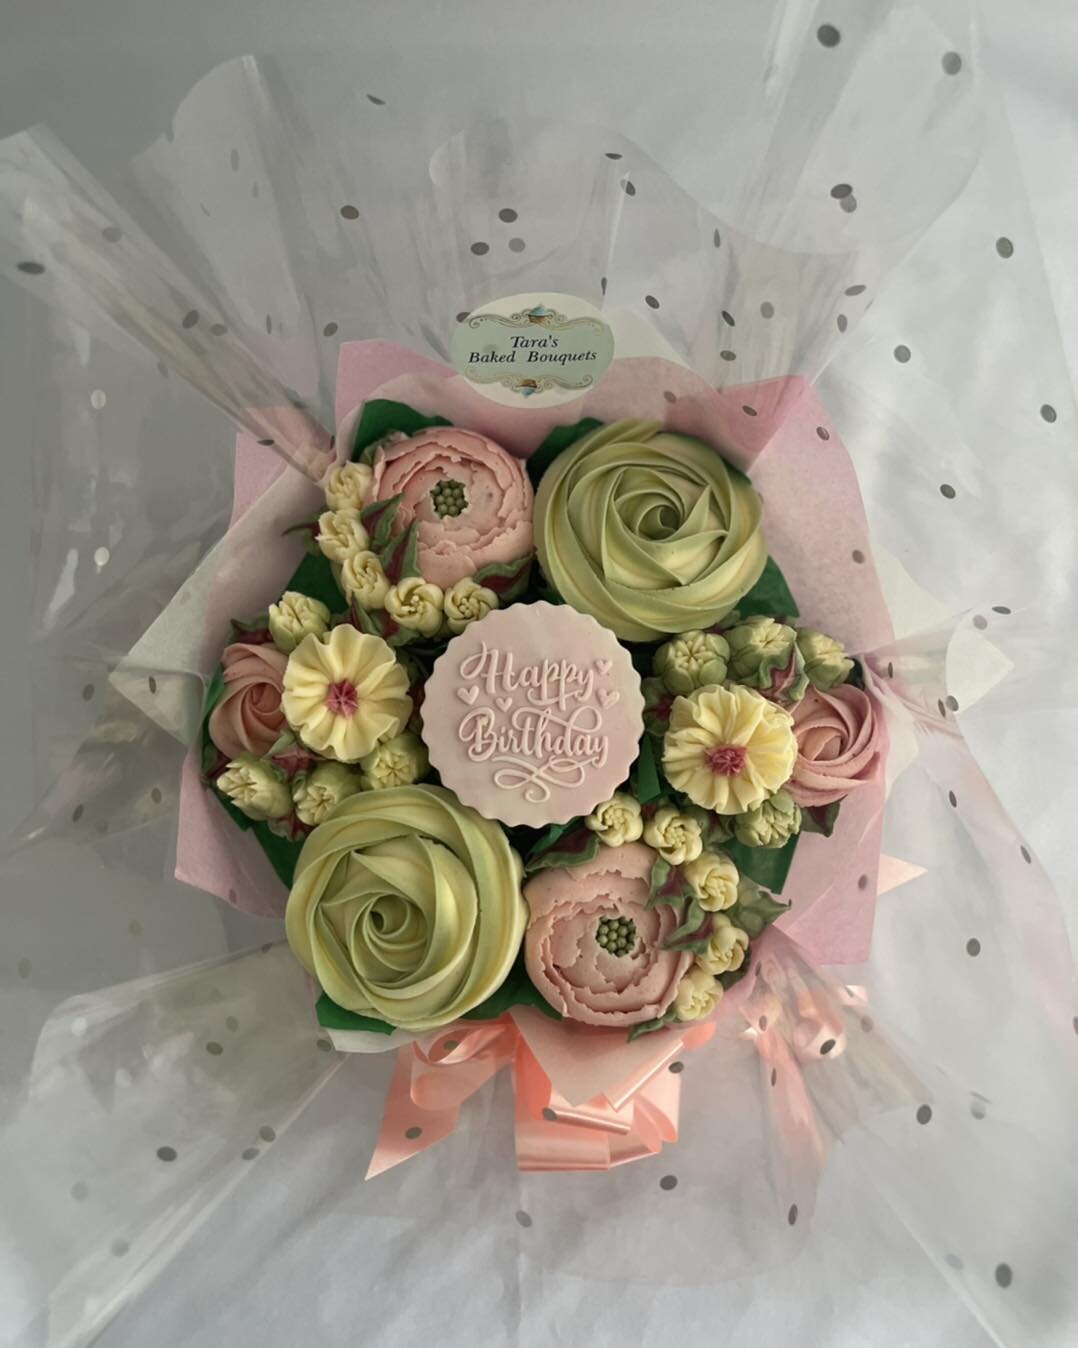 Celebrate the simple things!
Order now https://www.tarasbakedbouquets.ie/small-cupcake-bouquet #tarasbakedgoods #tarasbakedbouquet #tarasbakedbouquets #cupcakes #cupcakeflowerbouquets #cupcakeflowerbouquet #floralcupcakebouquet #floralcupcake #cupcak